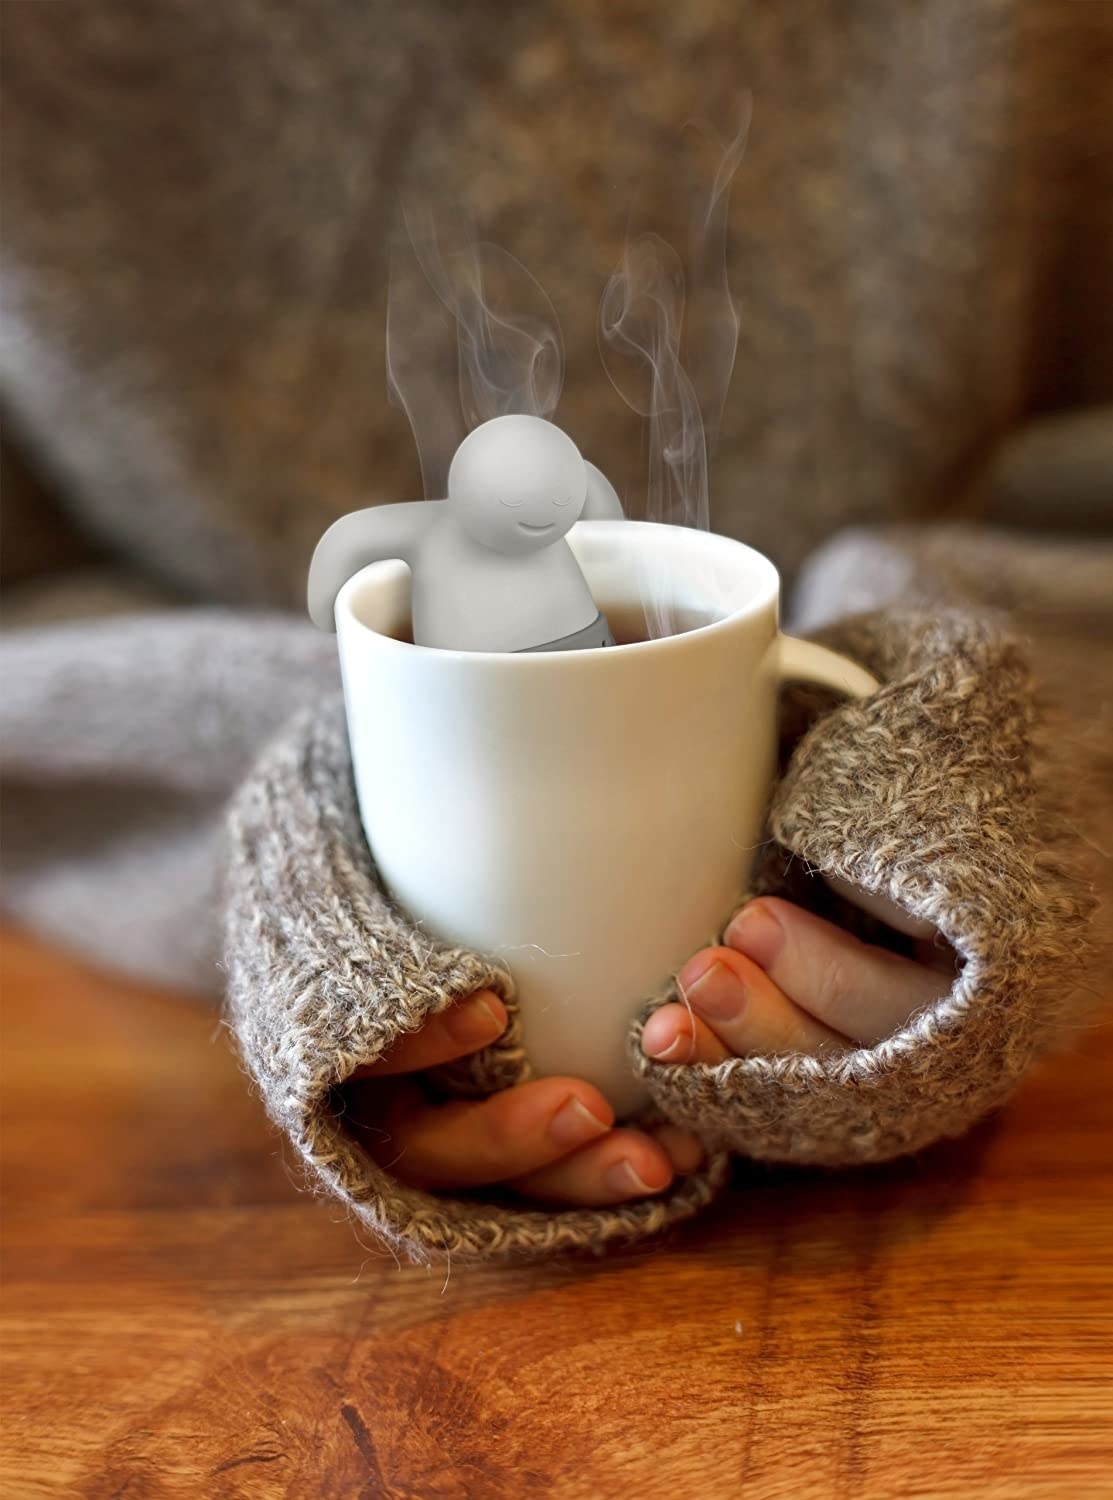 person holding mug with tea infuser in it